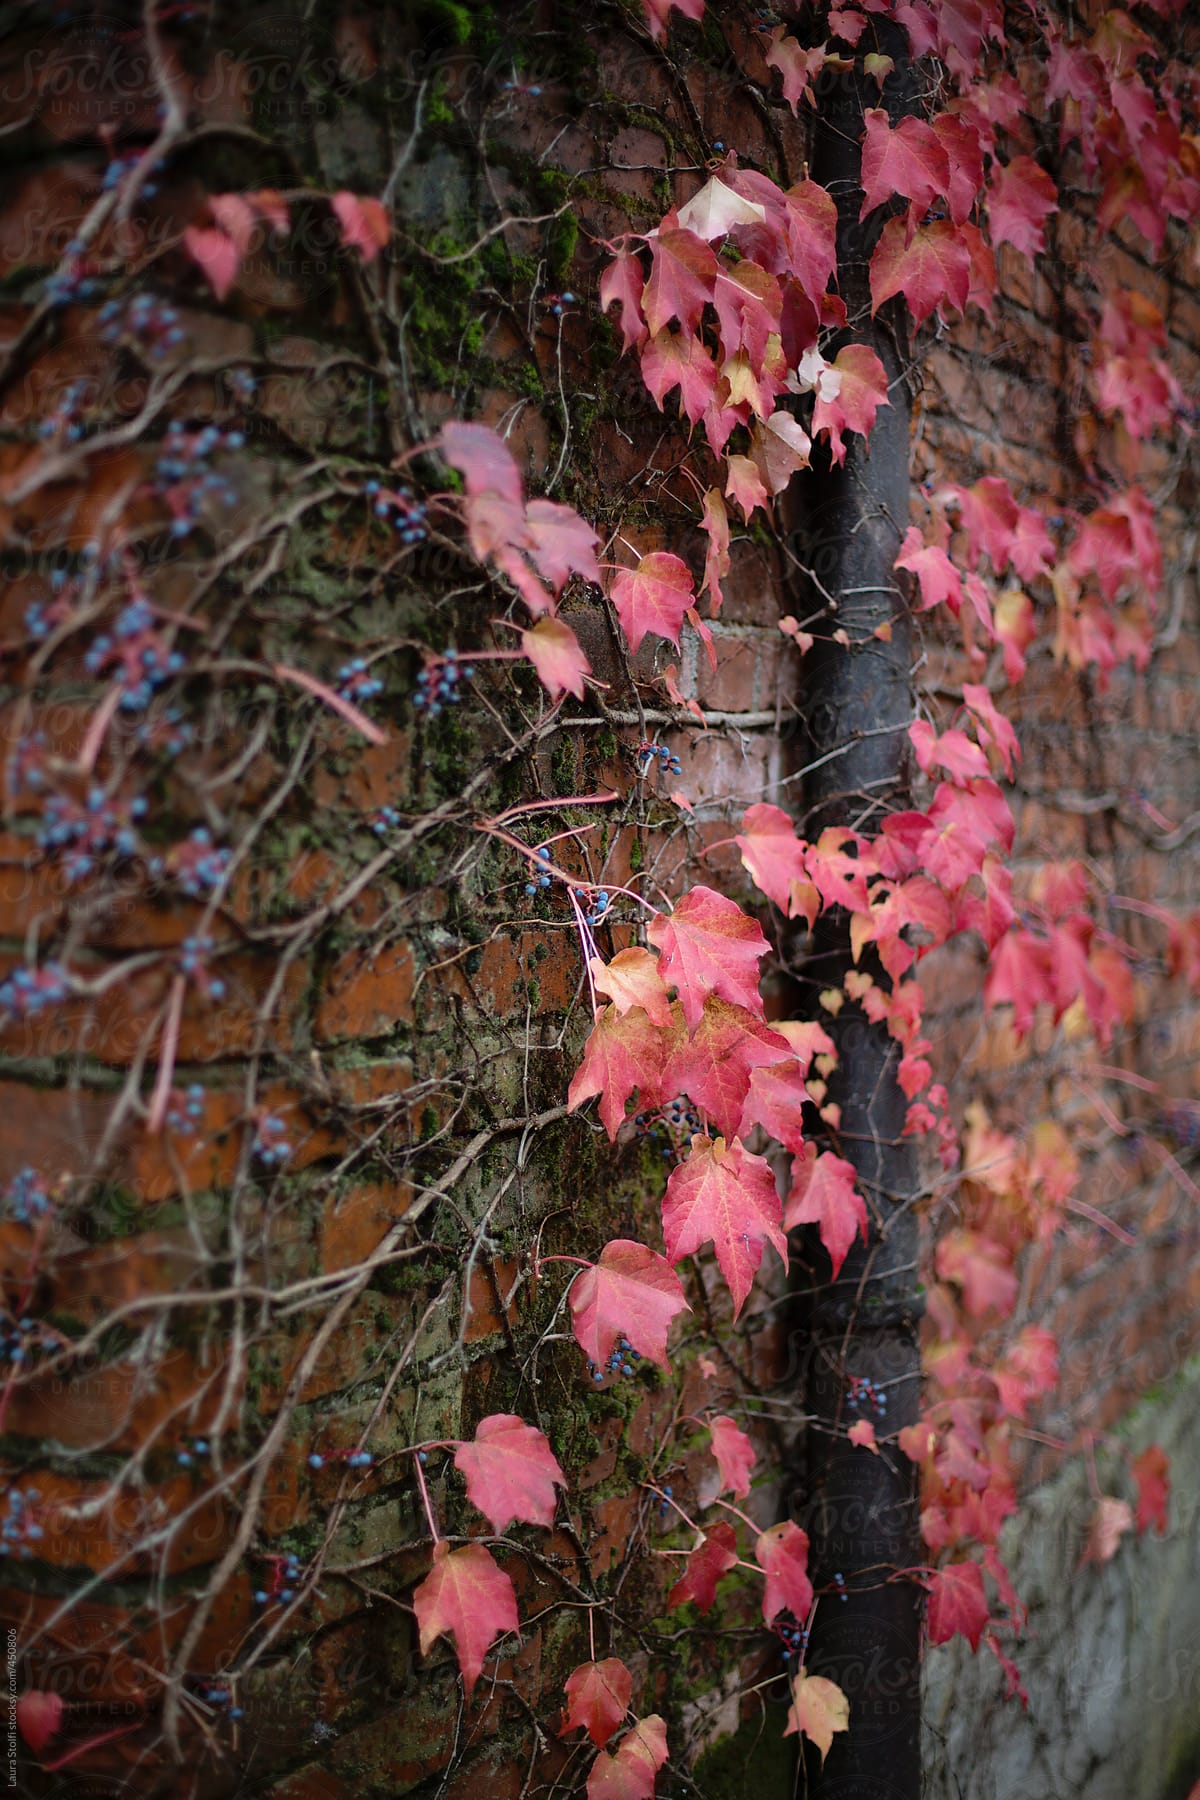 Side view of red ivy leaves and blue berries climbing on old bricks wall